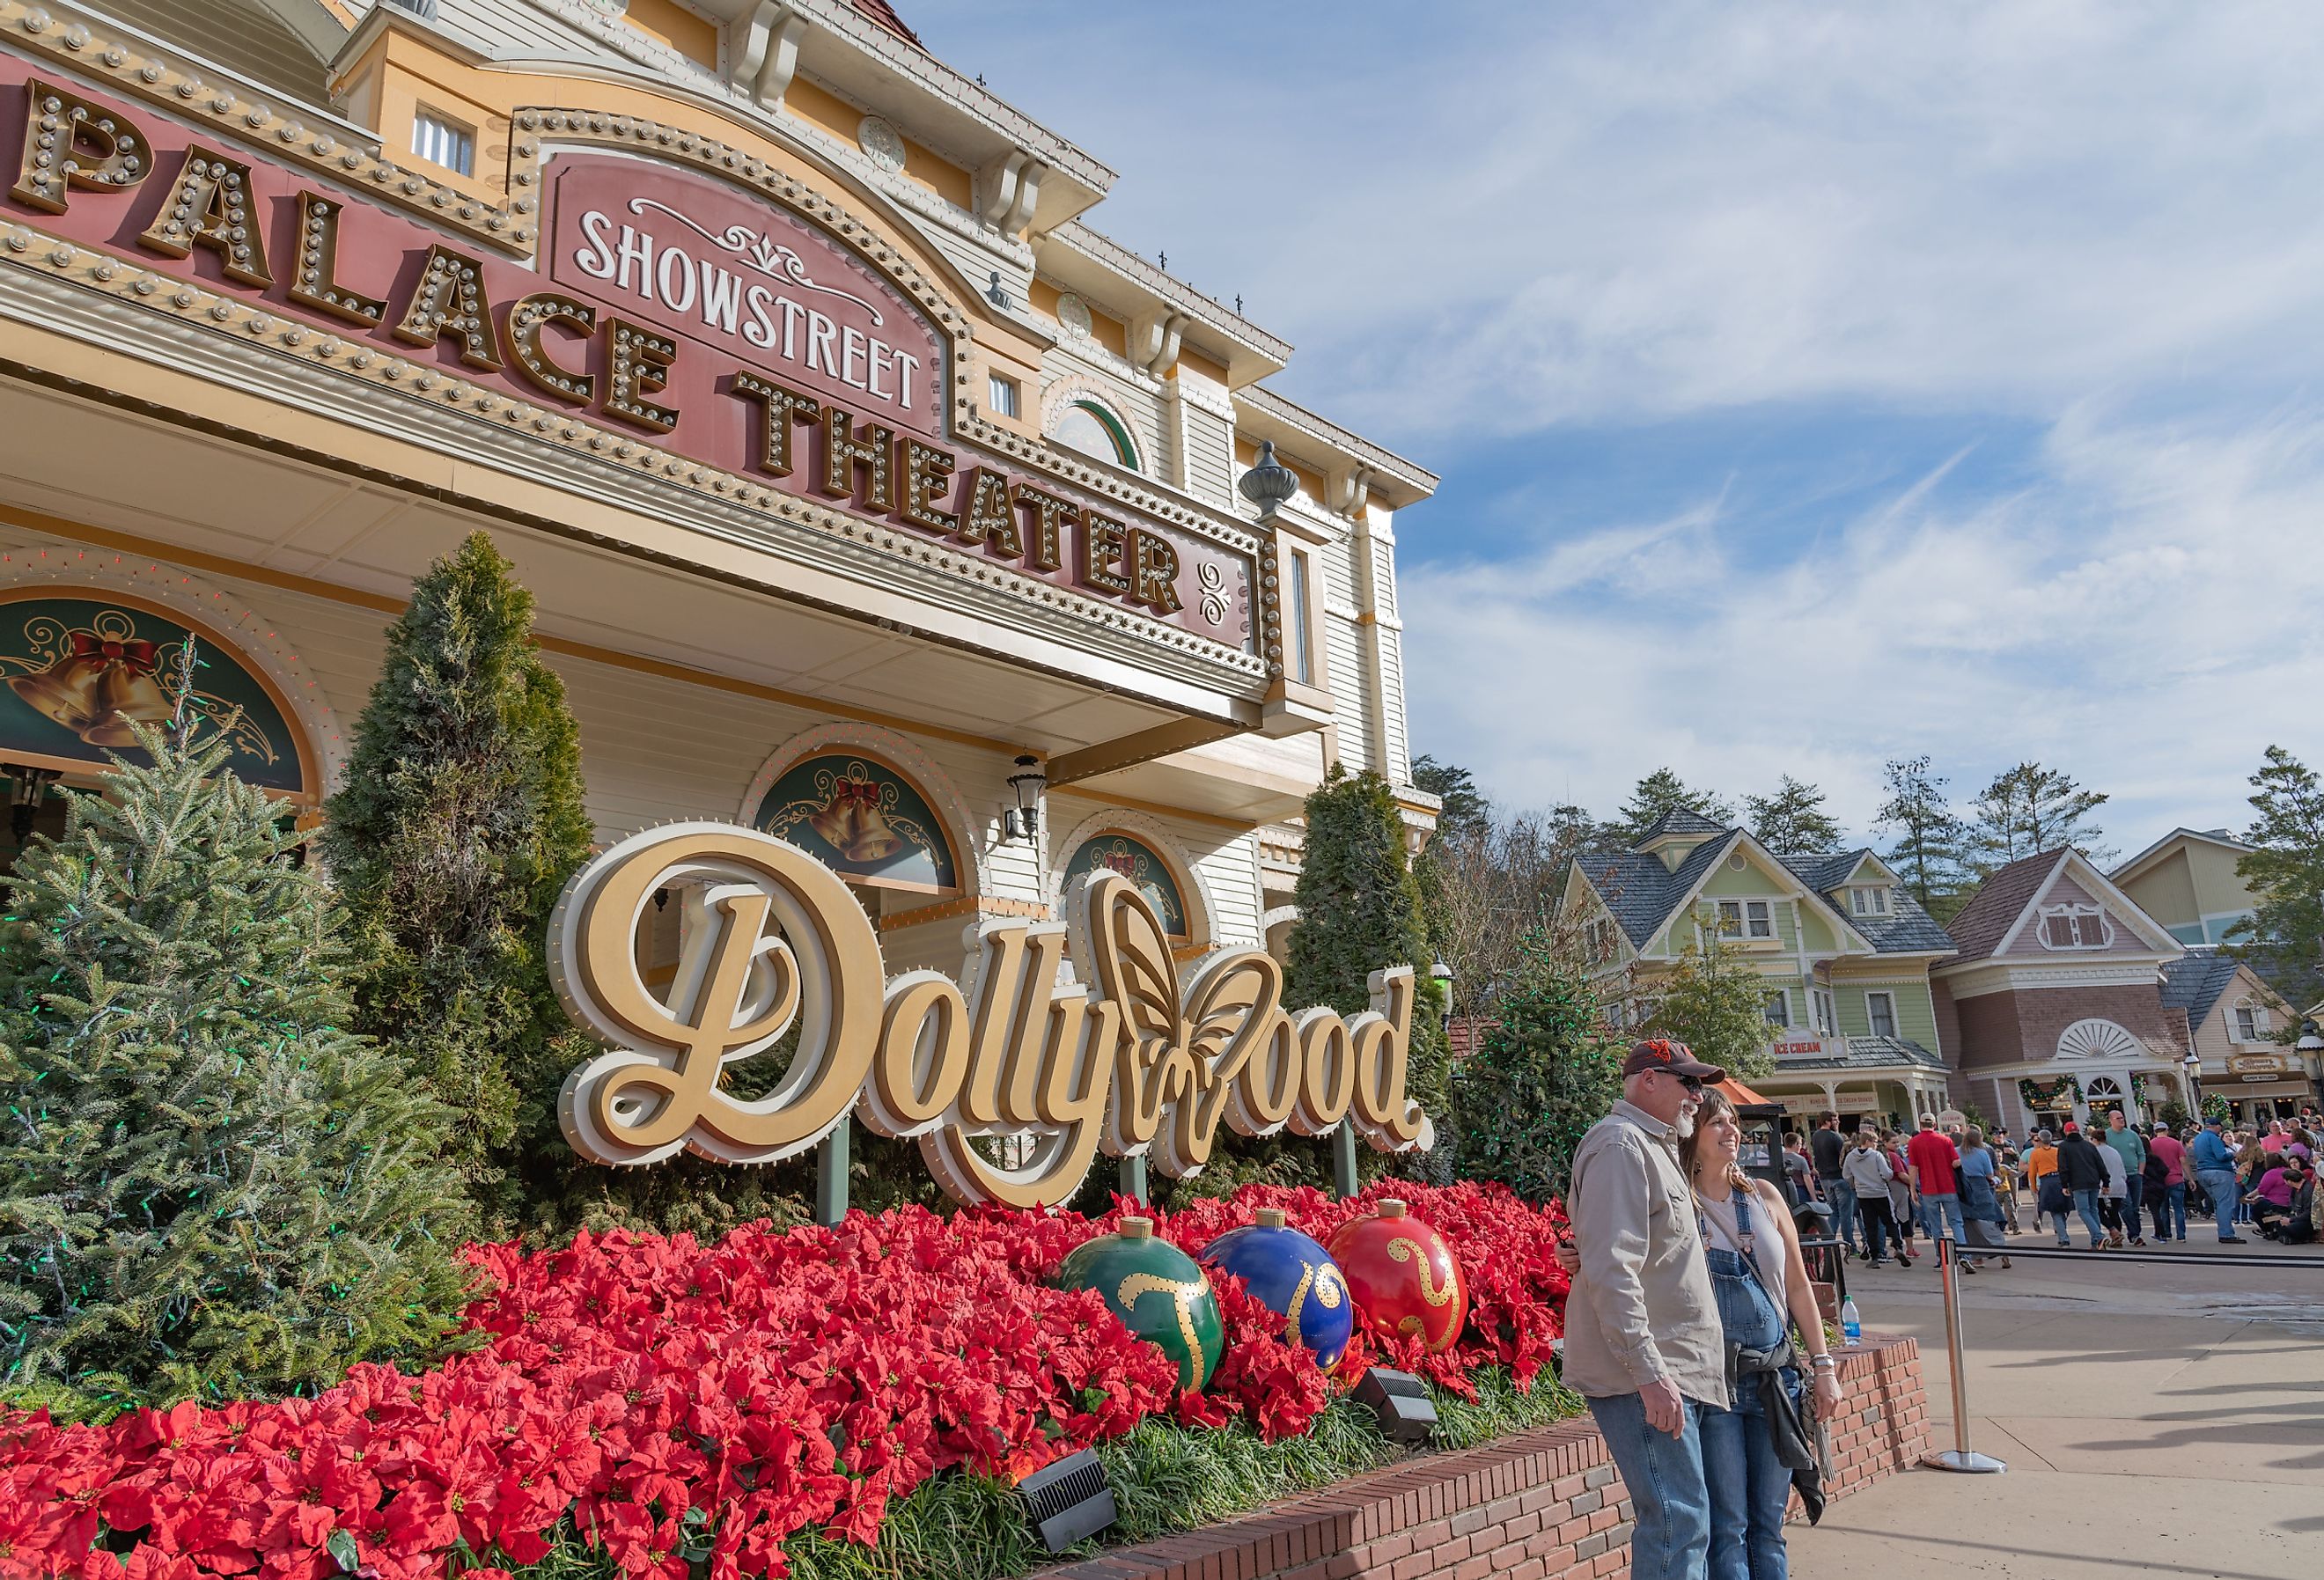 Dollywood is a picture-perfect theme park in the city of Pigeon Forge, Tennessee. Image credit Michael Gordon via Shutterstock